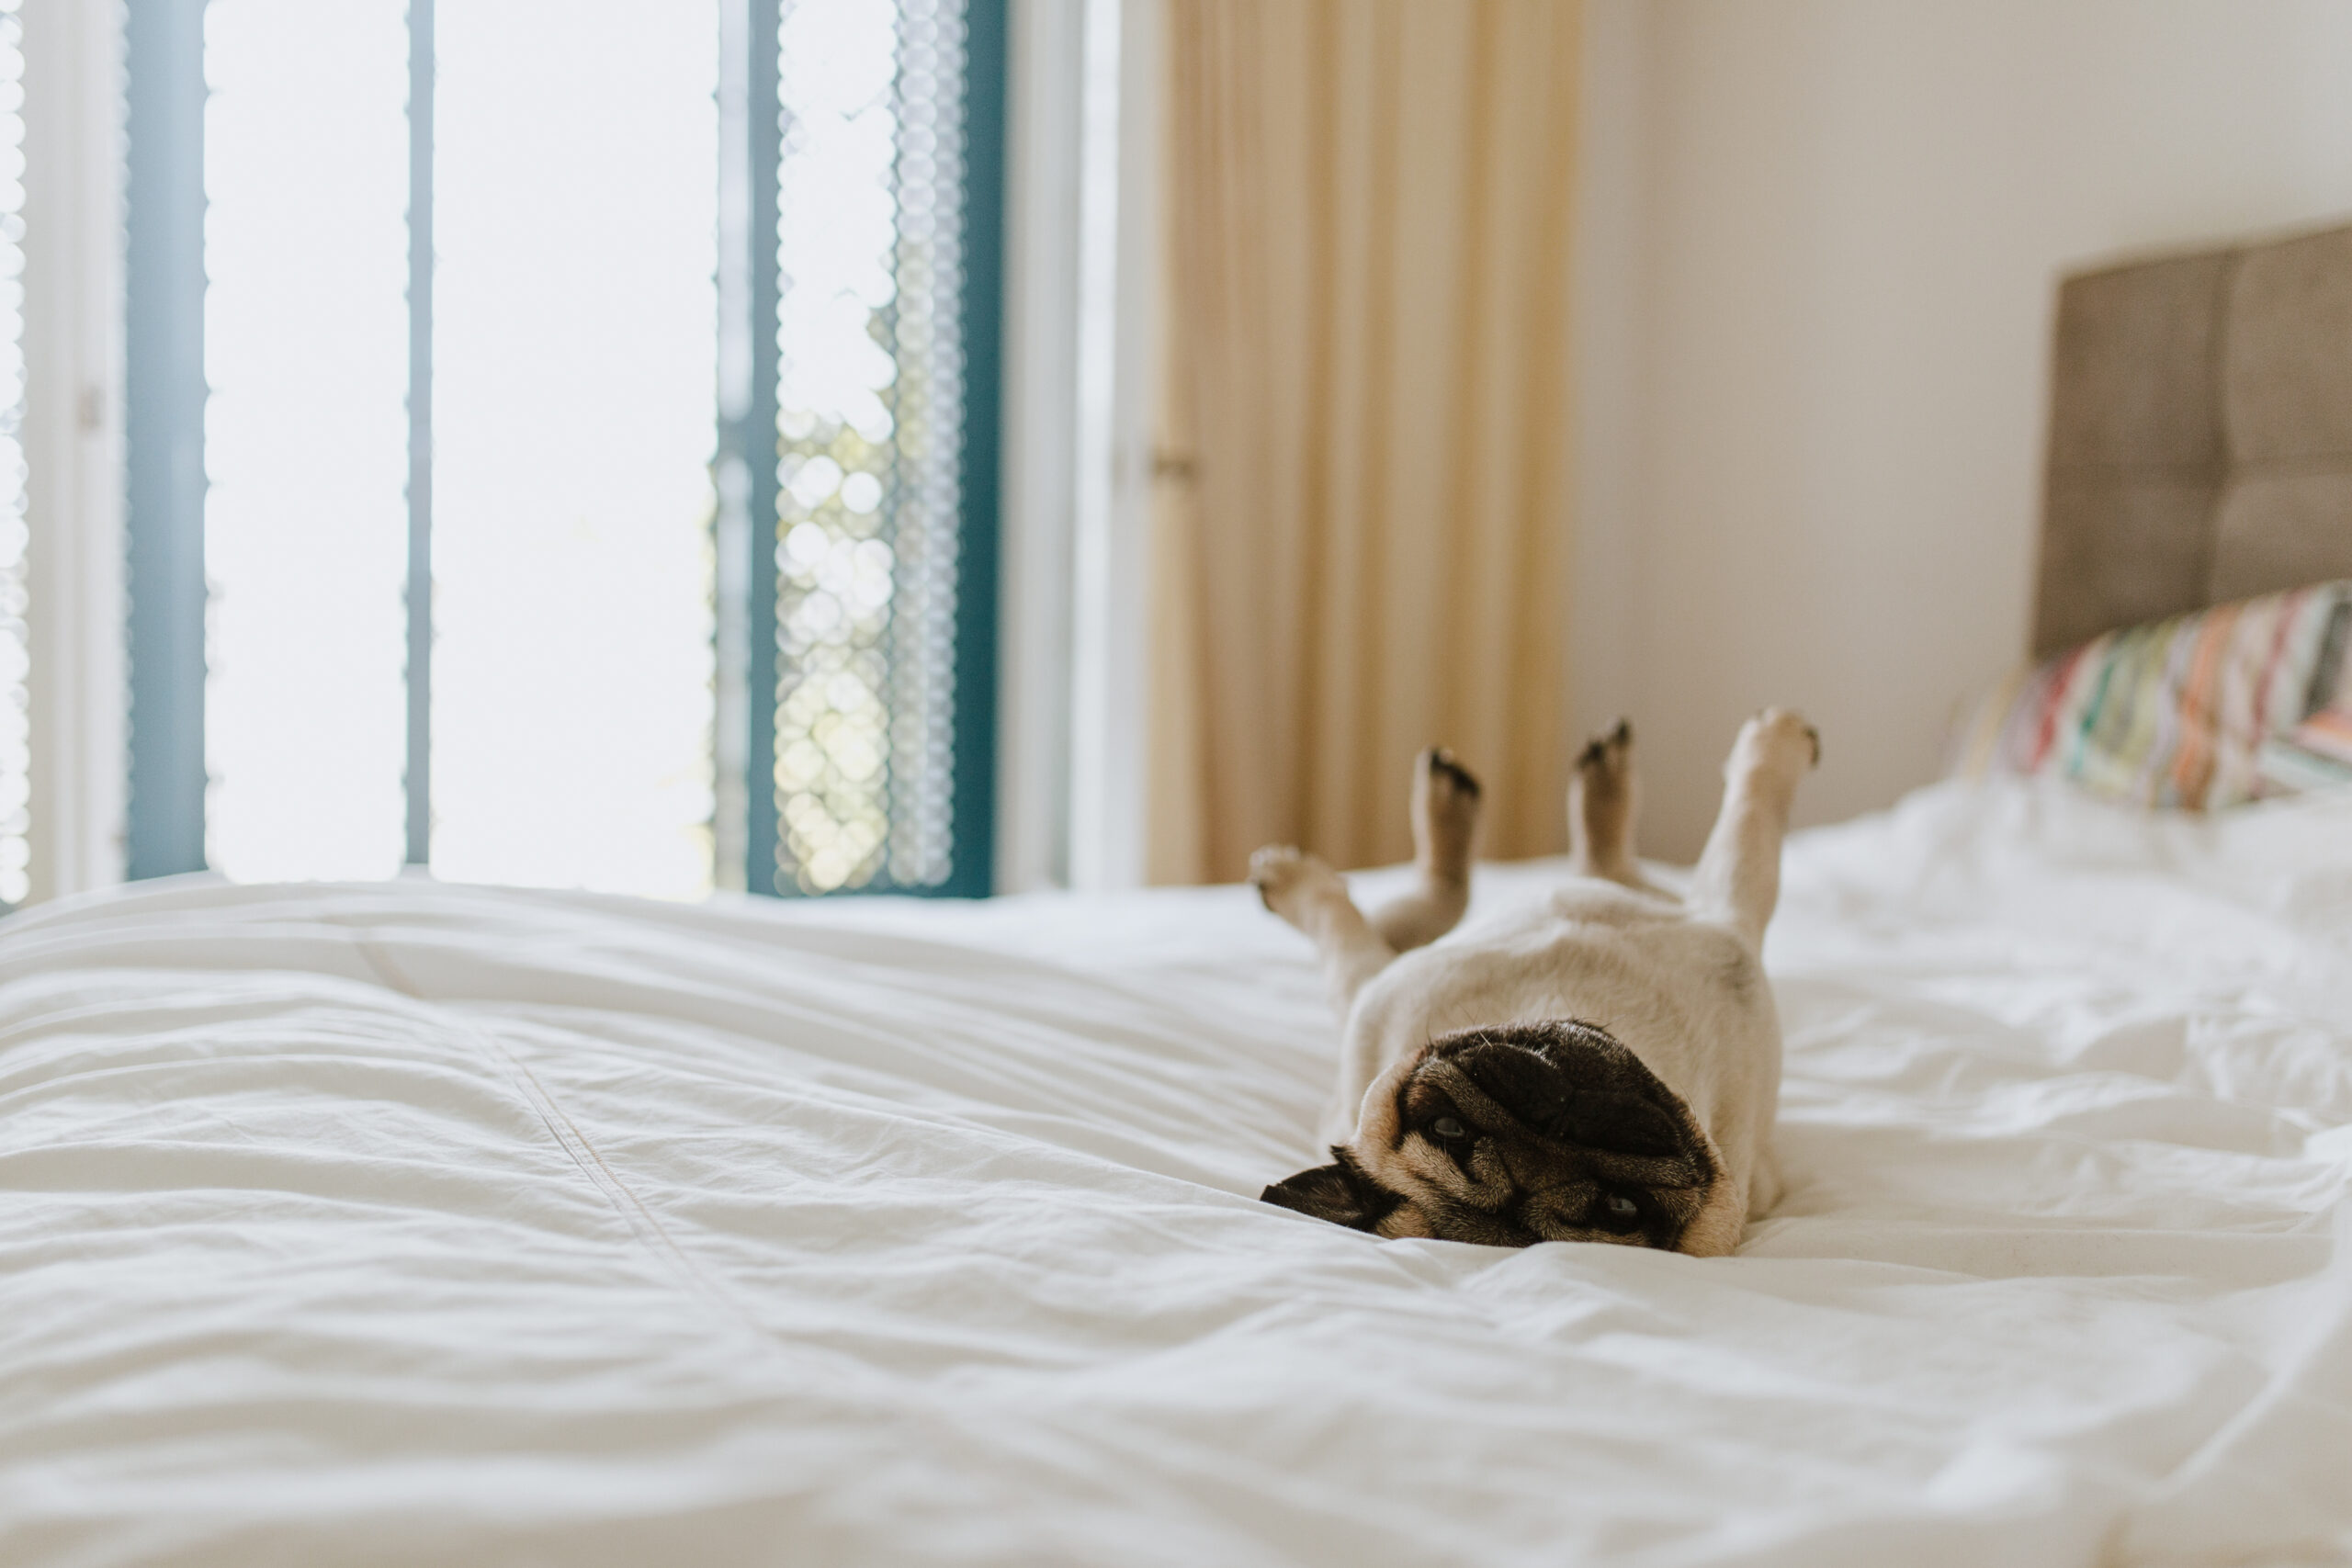 Should you let your dog sleep in your bed with you? While opinions on this topic differ greatly, this blog aims to explore the pros and cons.